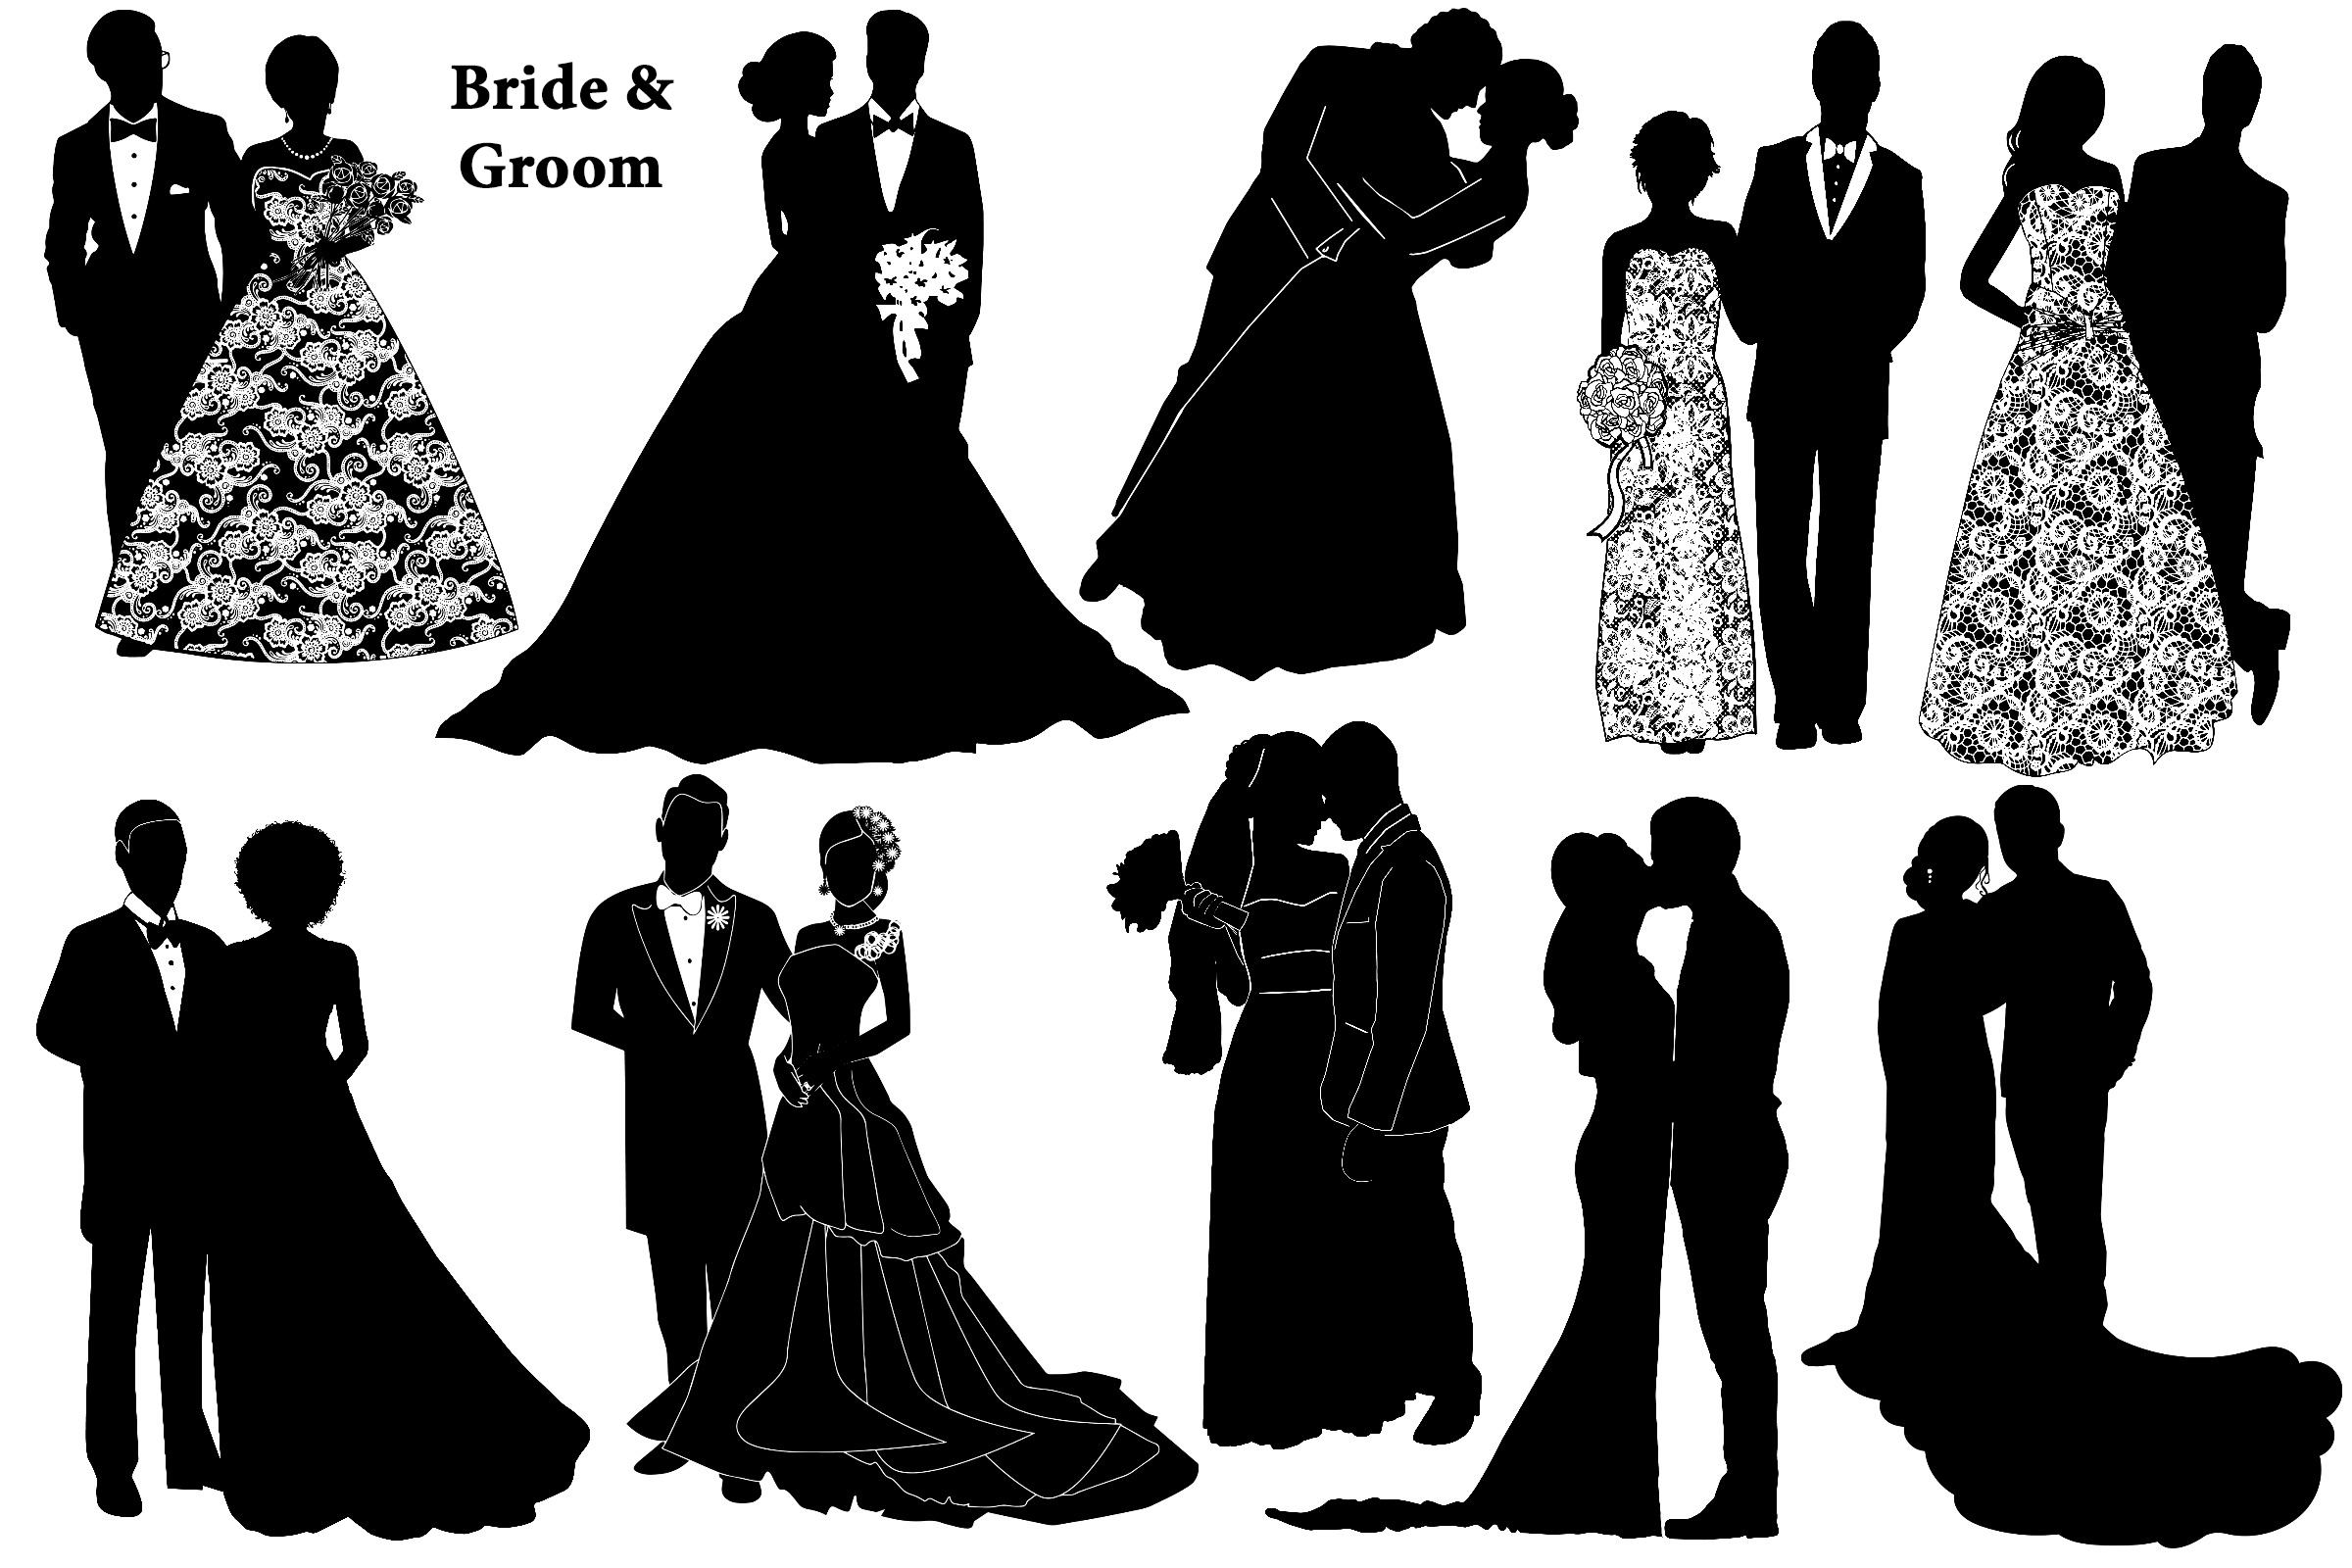 Wedding Silhouettes & Elements Vector AI EPS PNG